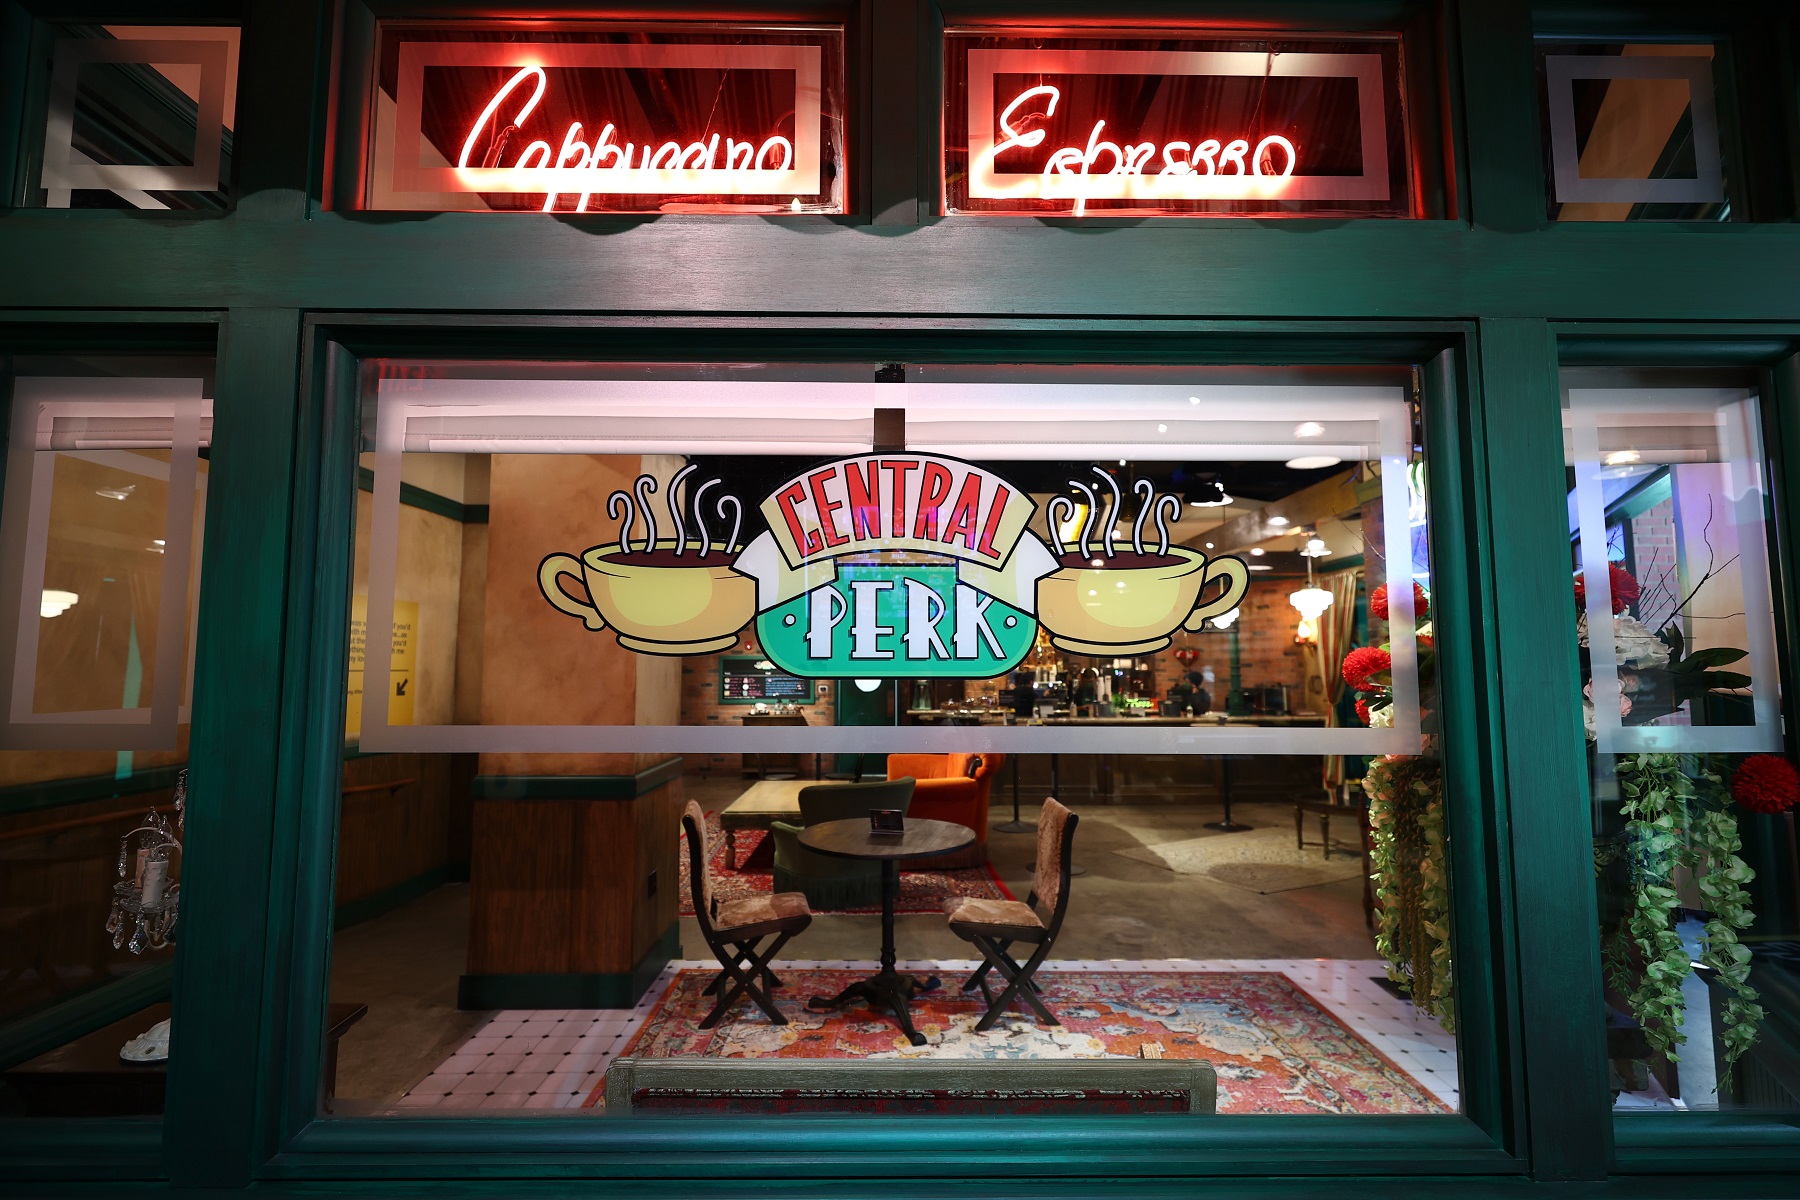 Central Perk on display at the opening of the Flagship FRIENDS Experience on March 15, 2021